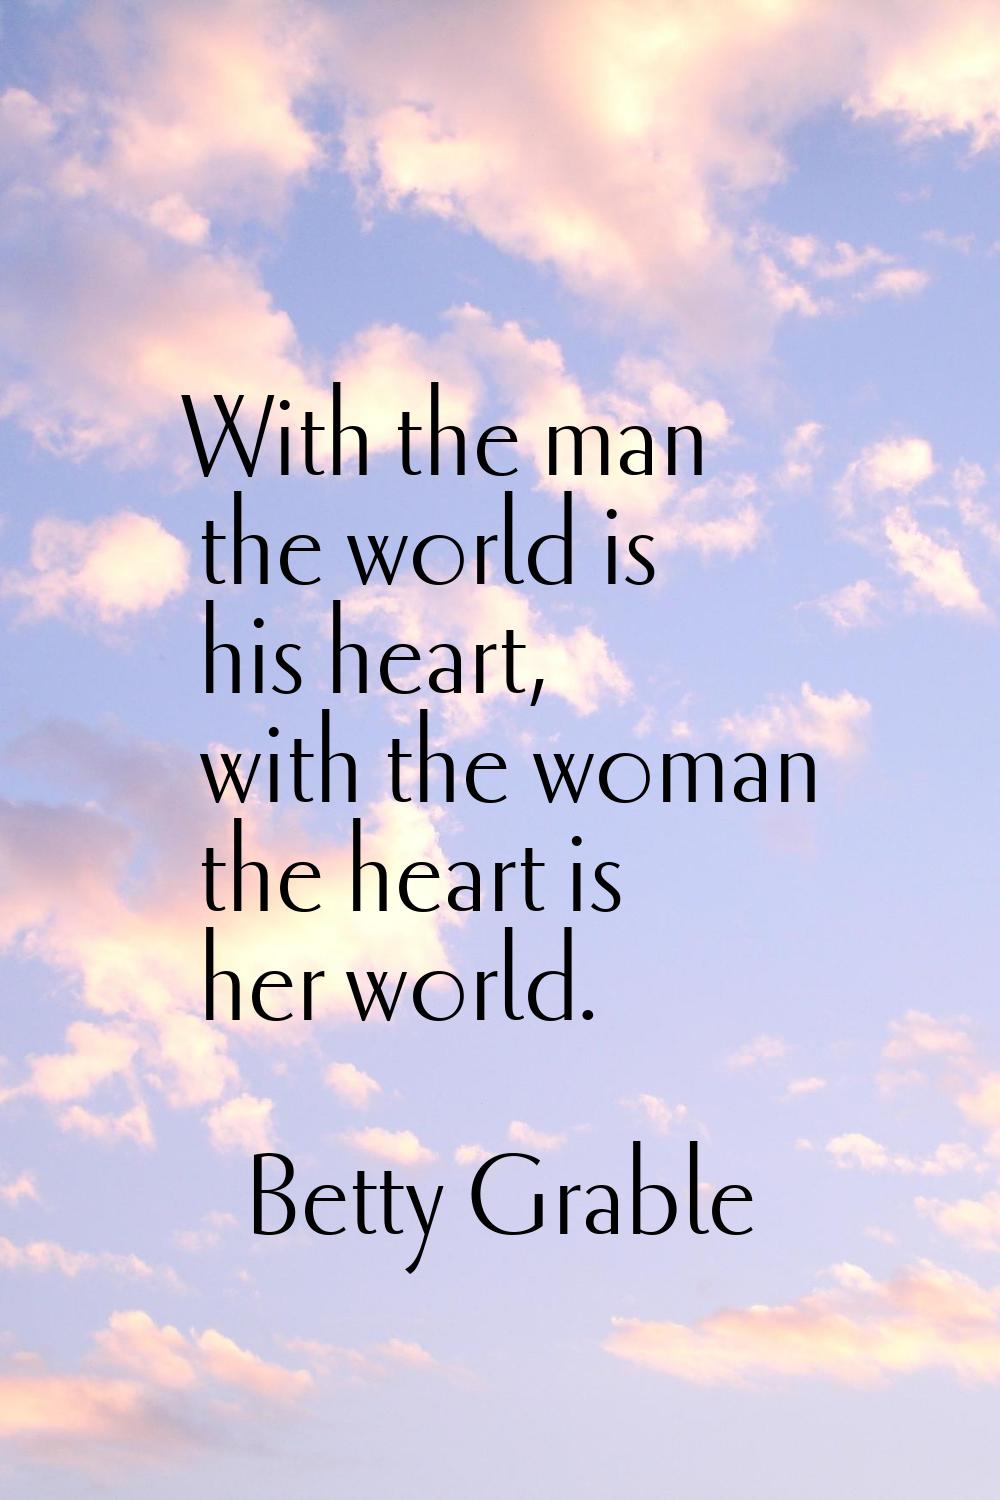 With the man the world is his heart, with the woman the heart is her world.